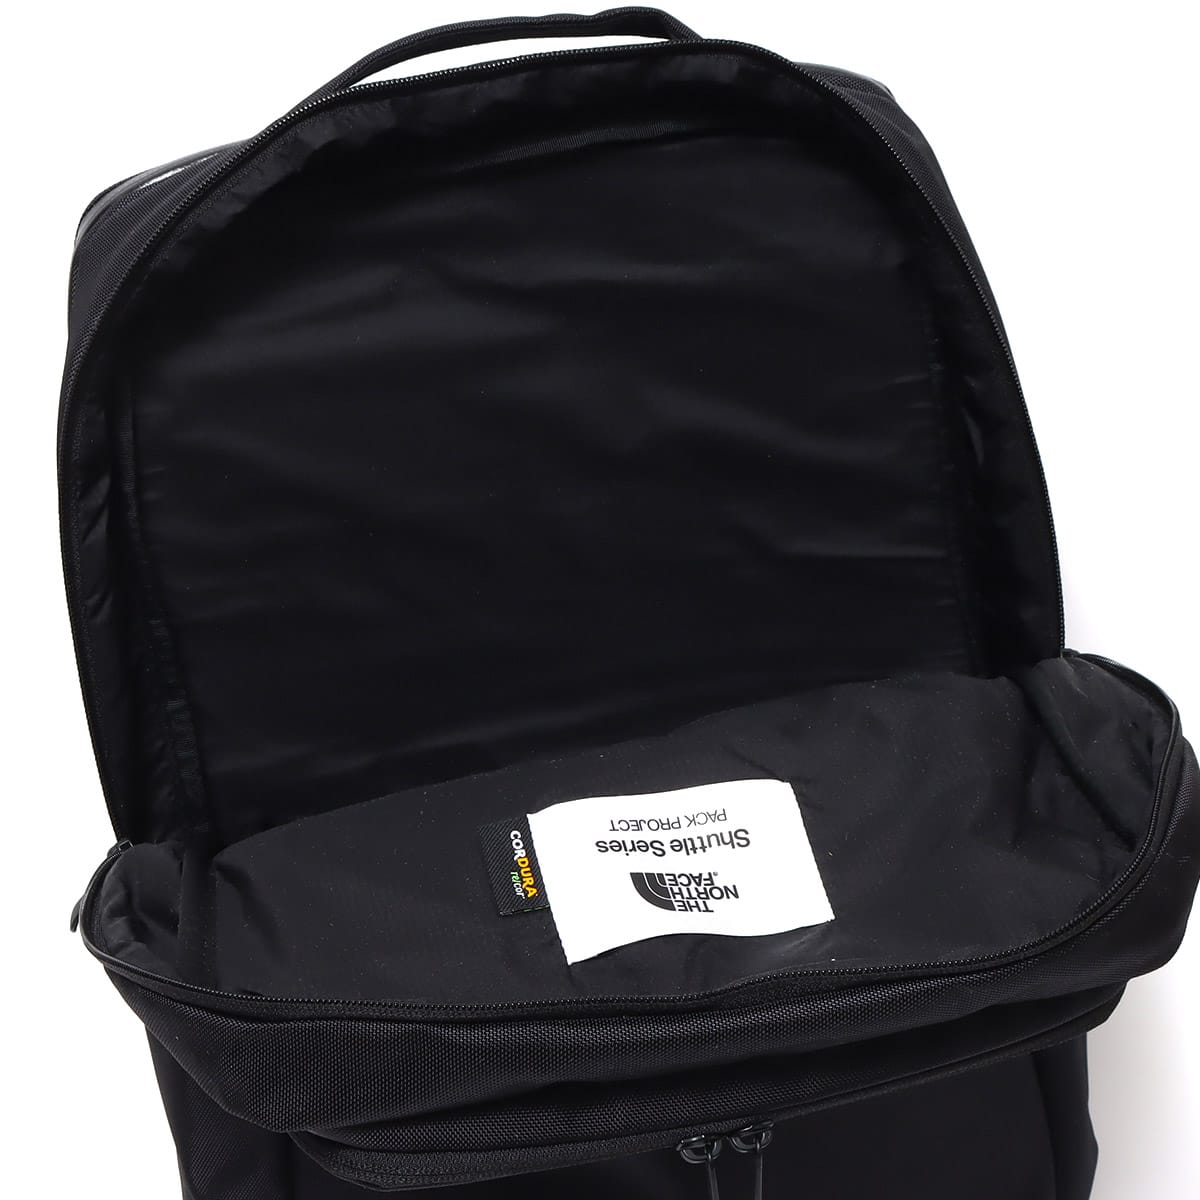 THE NORTH FACE SHUTTLE DAYPACK BLACK